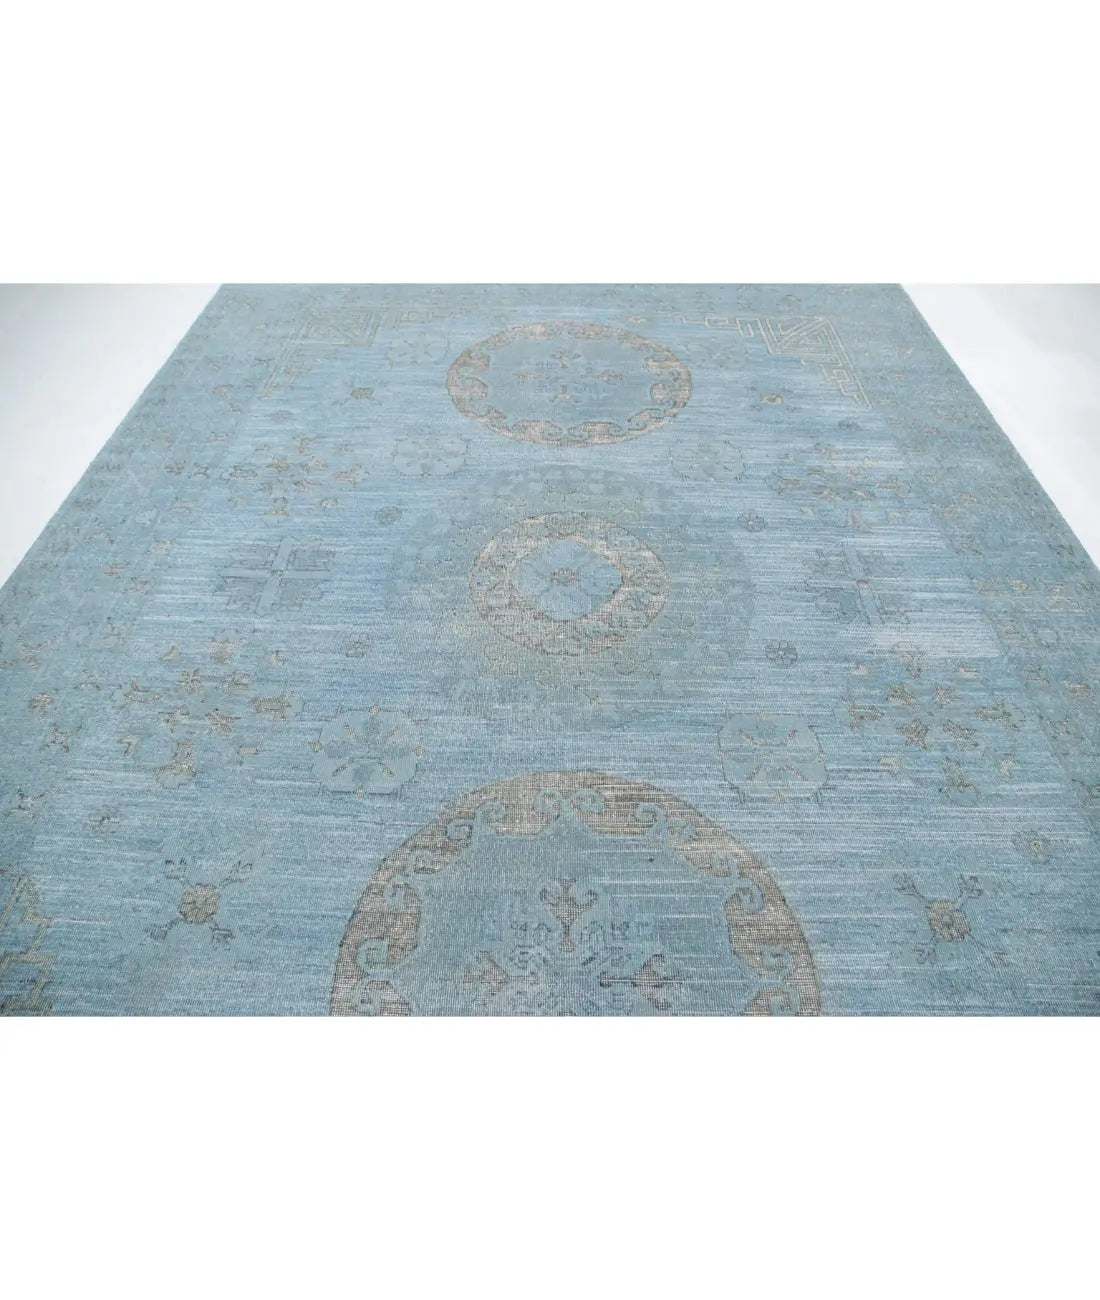 Hand Knotted Onyx Wool Rug - 8'9'' x 11'9''